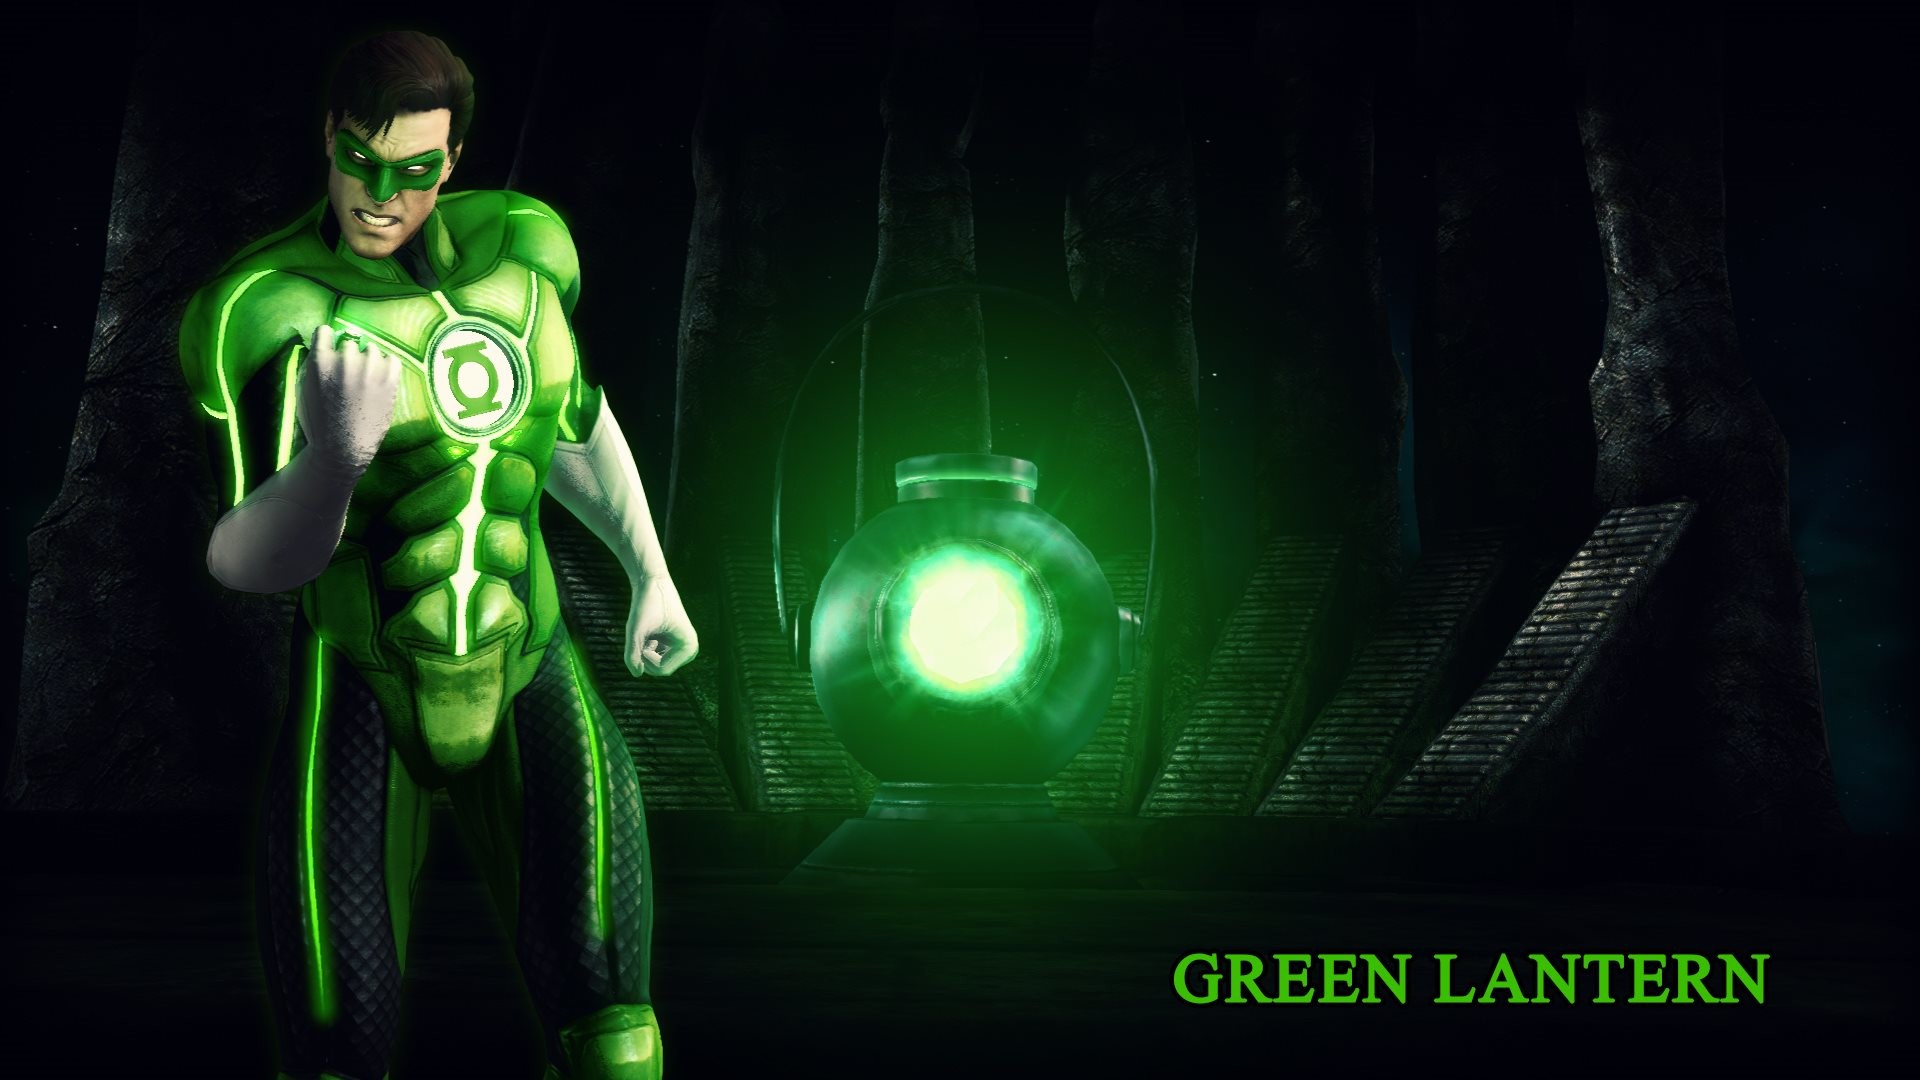 1920x1080 In the 3rd wallpaper is Green Lantern from Injustice - Gods Among Us